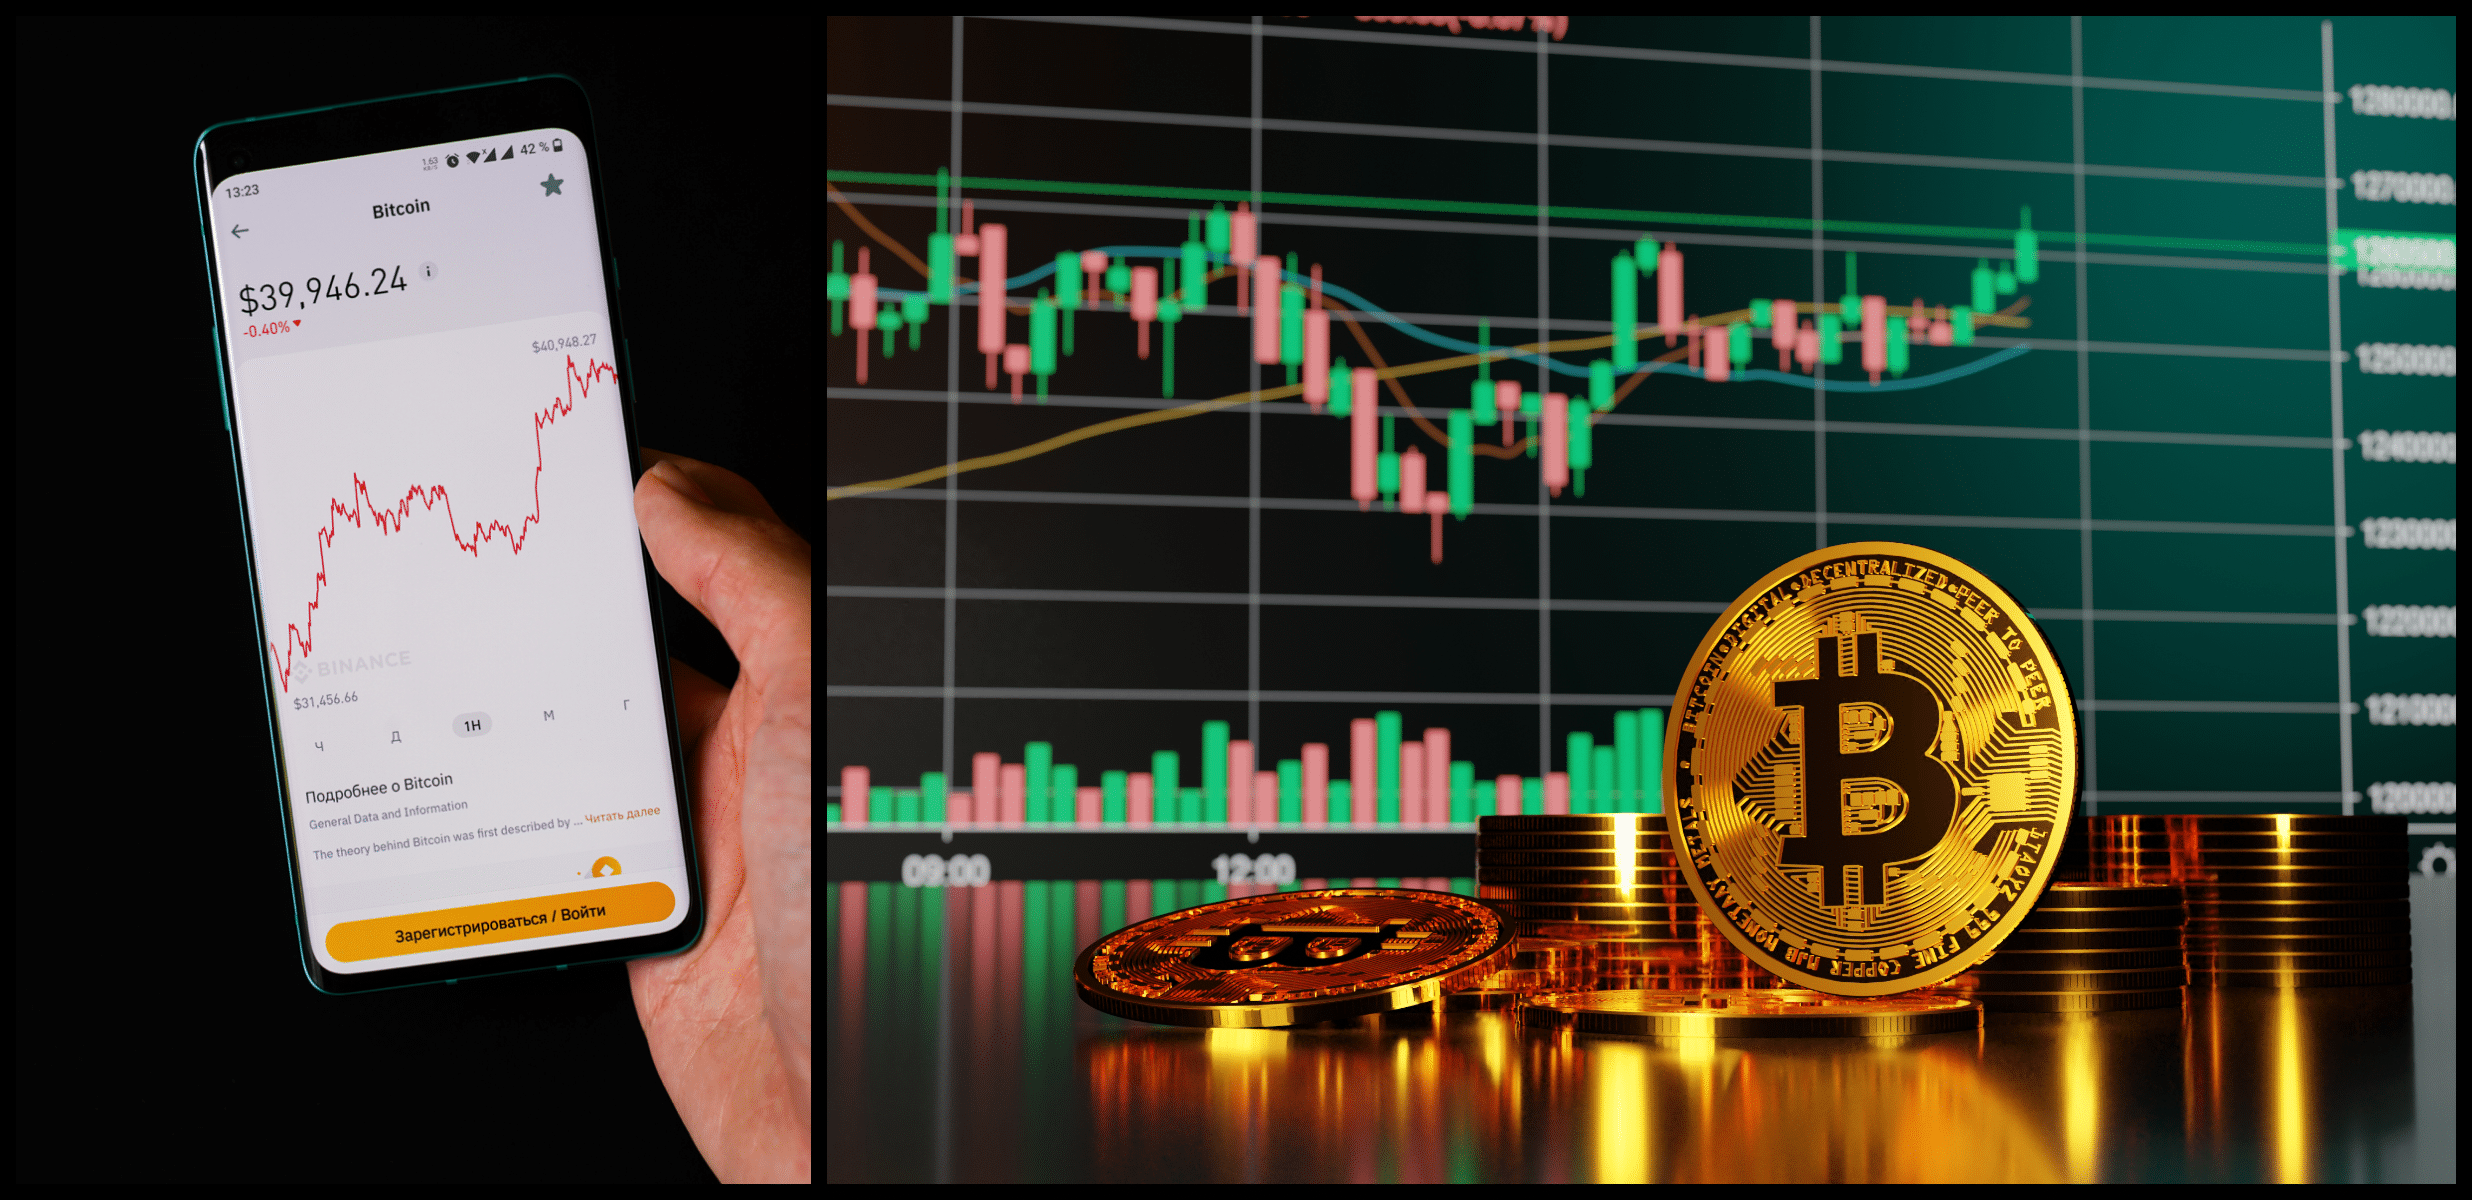 Don't be afraid of overflows and avoid the crowd.  Here are 5 tips on how to trade cryptocurrencies responsibly